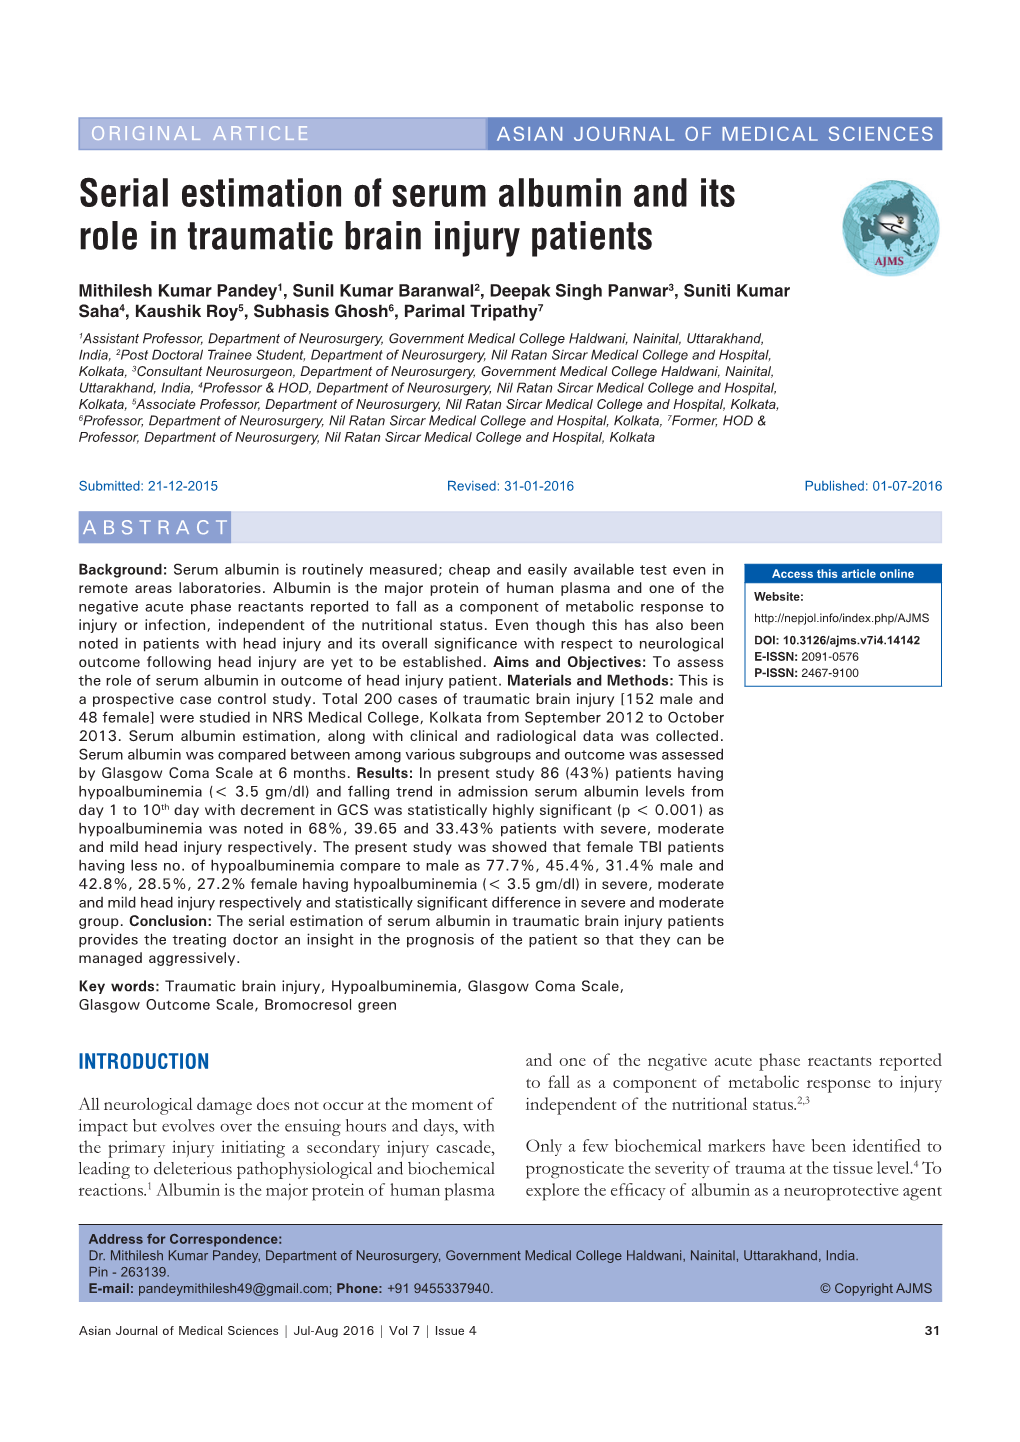 Serial Estimation of Serum Albumin and Its Role in Traumatic Brain Injury Patients